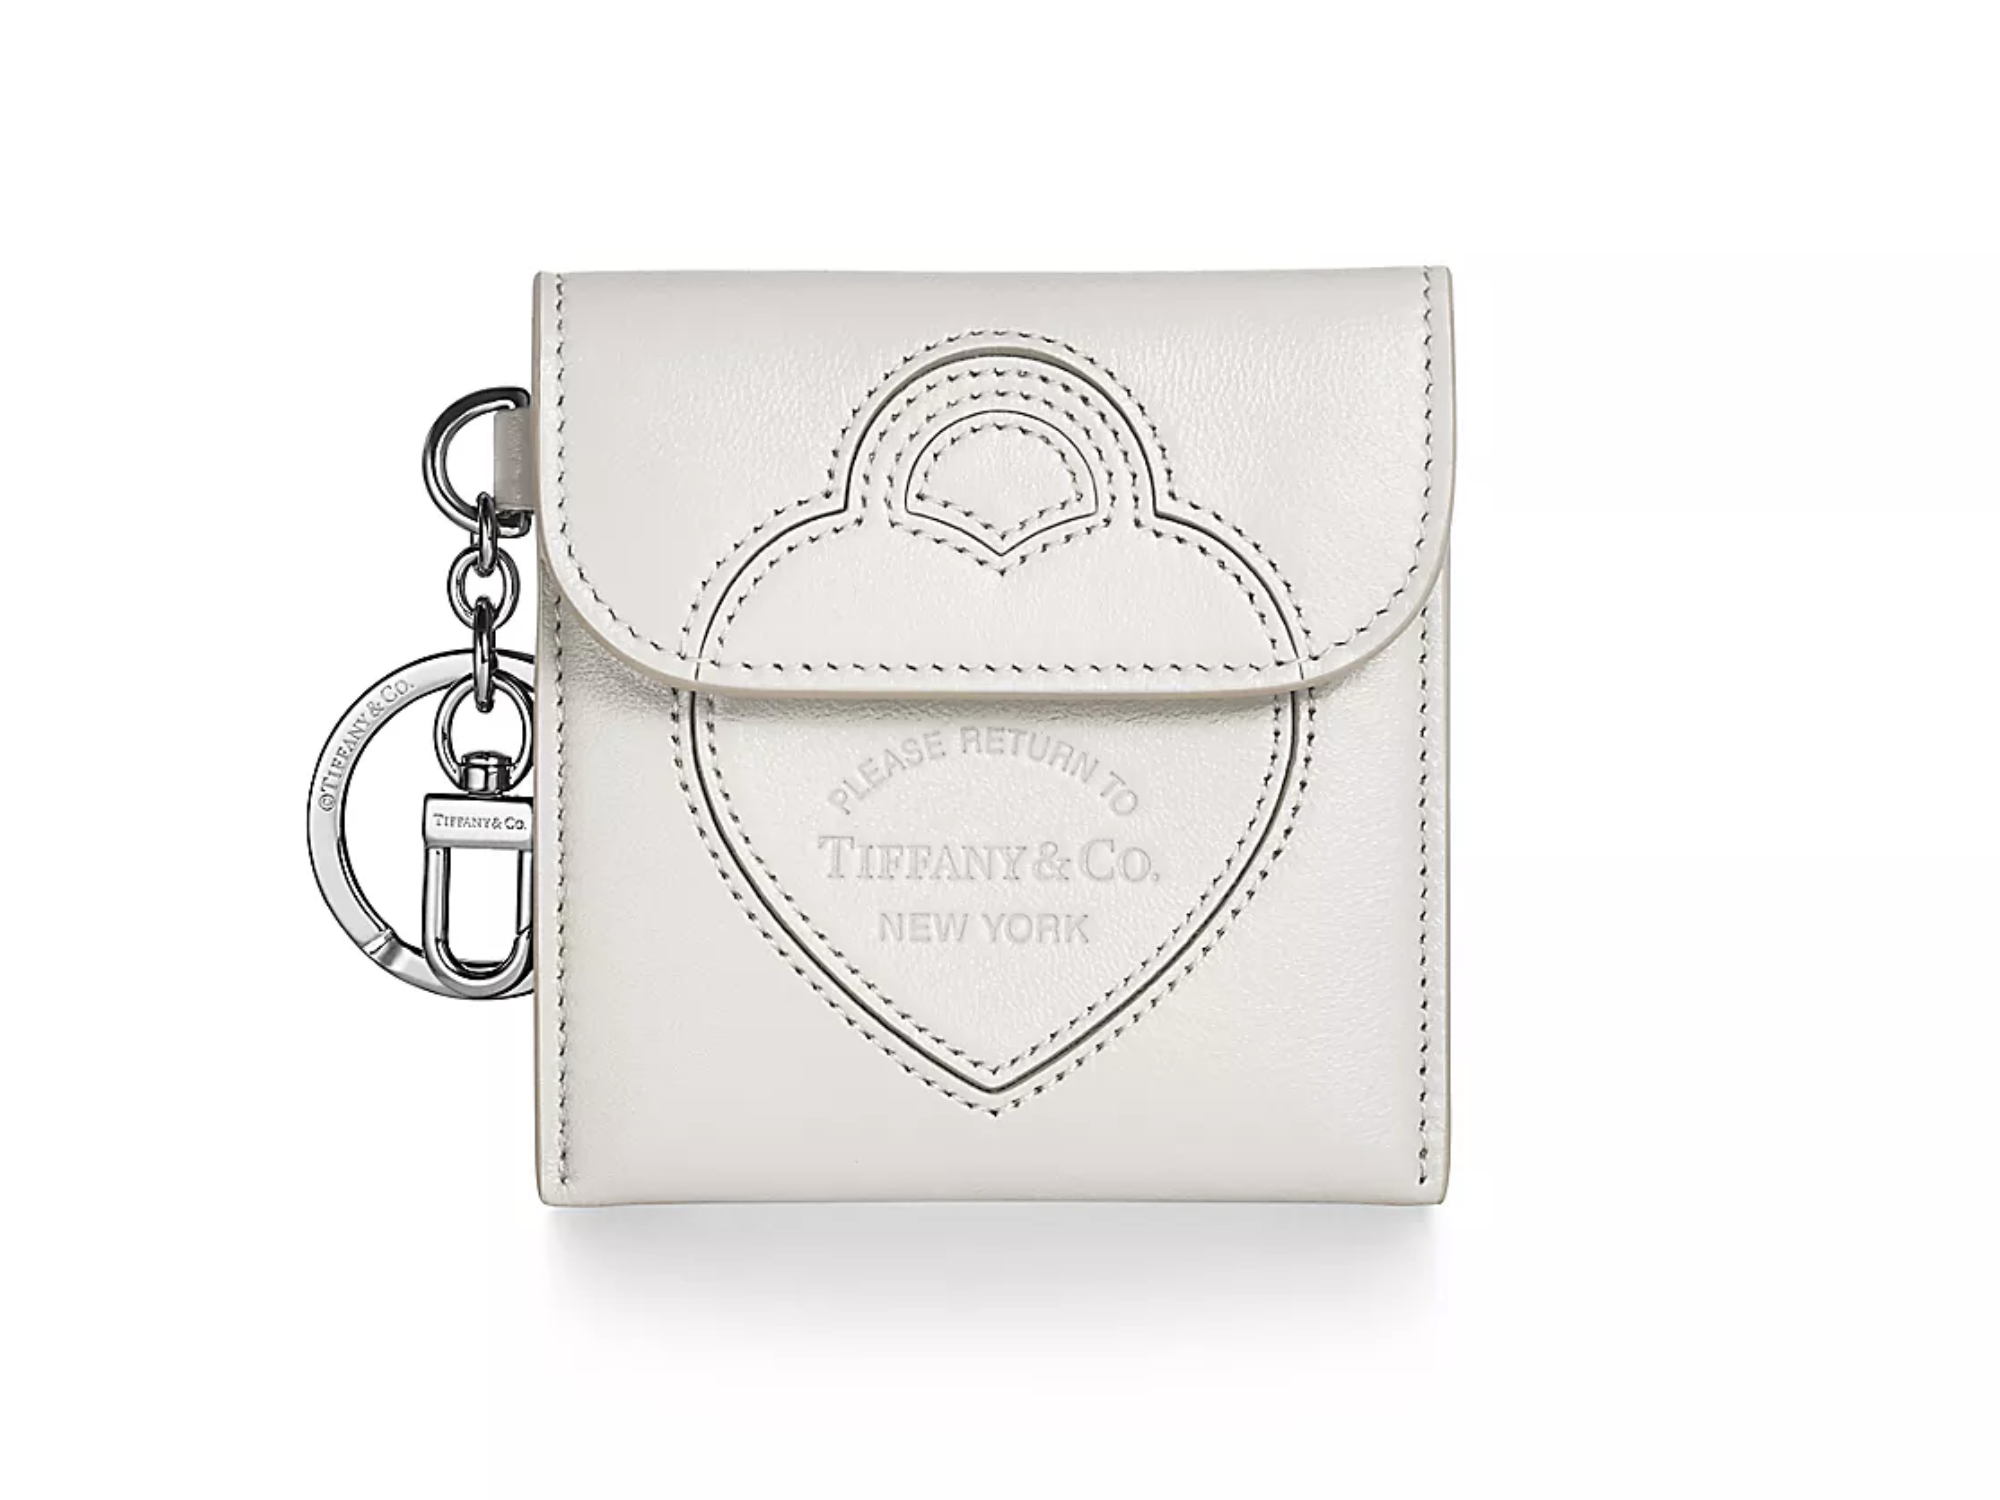 Chic Charms To Personalise Your Bags À La The SS24 Runway